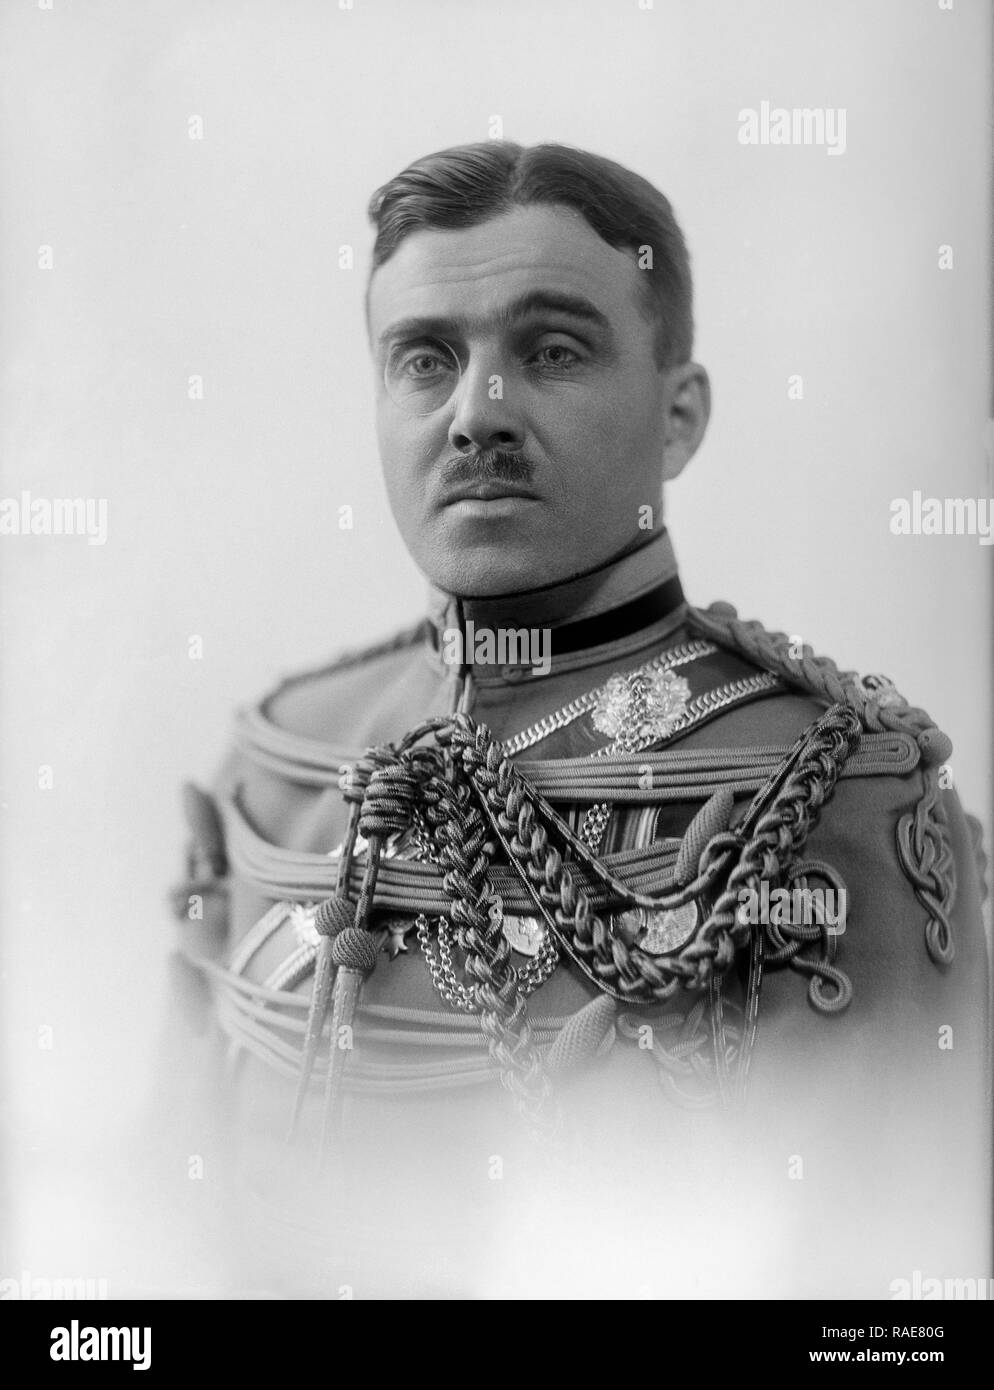 Photograph taken on 30th April 1924. Lieutenant-Colonel Latham Valentine Stewart Blacker OBE (1 October 1887 – 19 April 1964) was a British Army officer and inventor of weapons; he invented the Blacker Bombard, from which was developed the Hedgehog anti-submarine spigot-mortar - and laid the basis of the PIAT anti tank weaponHe served in Afghanistan, Turkestan, and Russia, earning several mentions in dispatches. He served with the 69th Punjabis, Queen's Own Corps of Guides, and 57th Wilde's Rifles.He had learned to fly in 1911, receiving Certificate No. 121 from the Royal Aero Club. Stock Photo